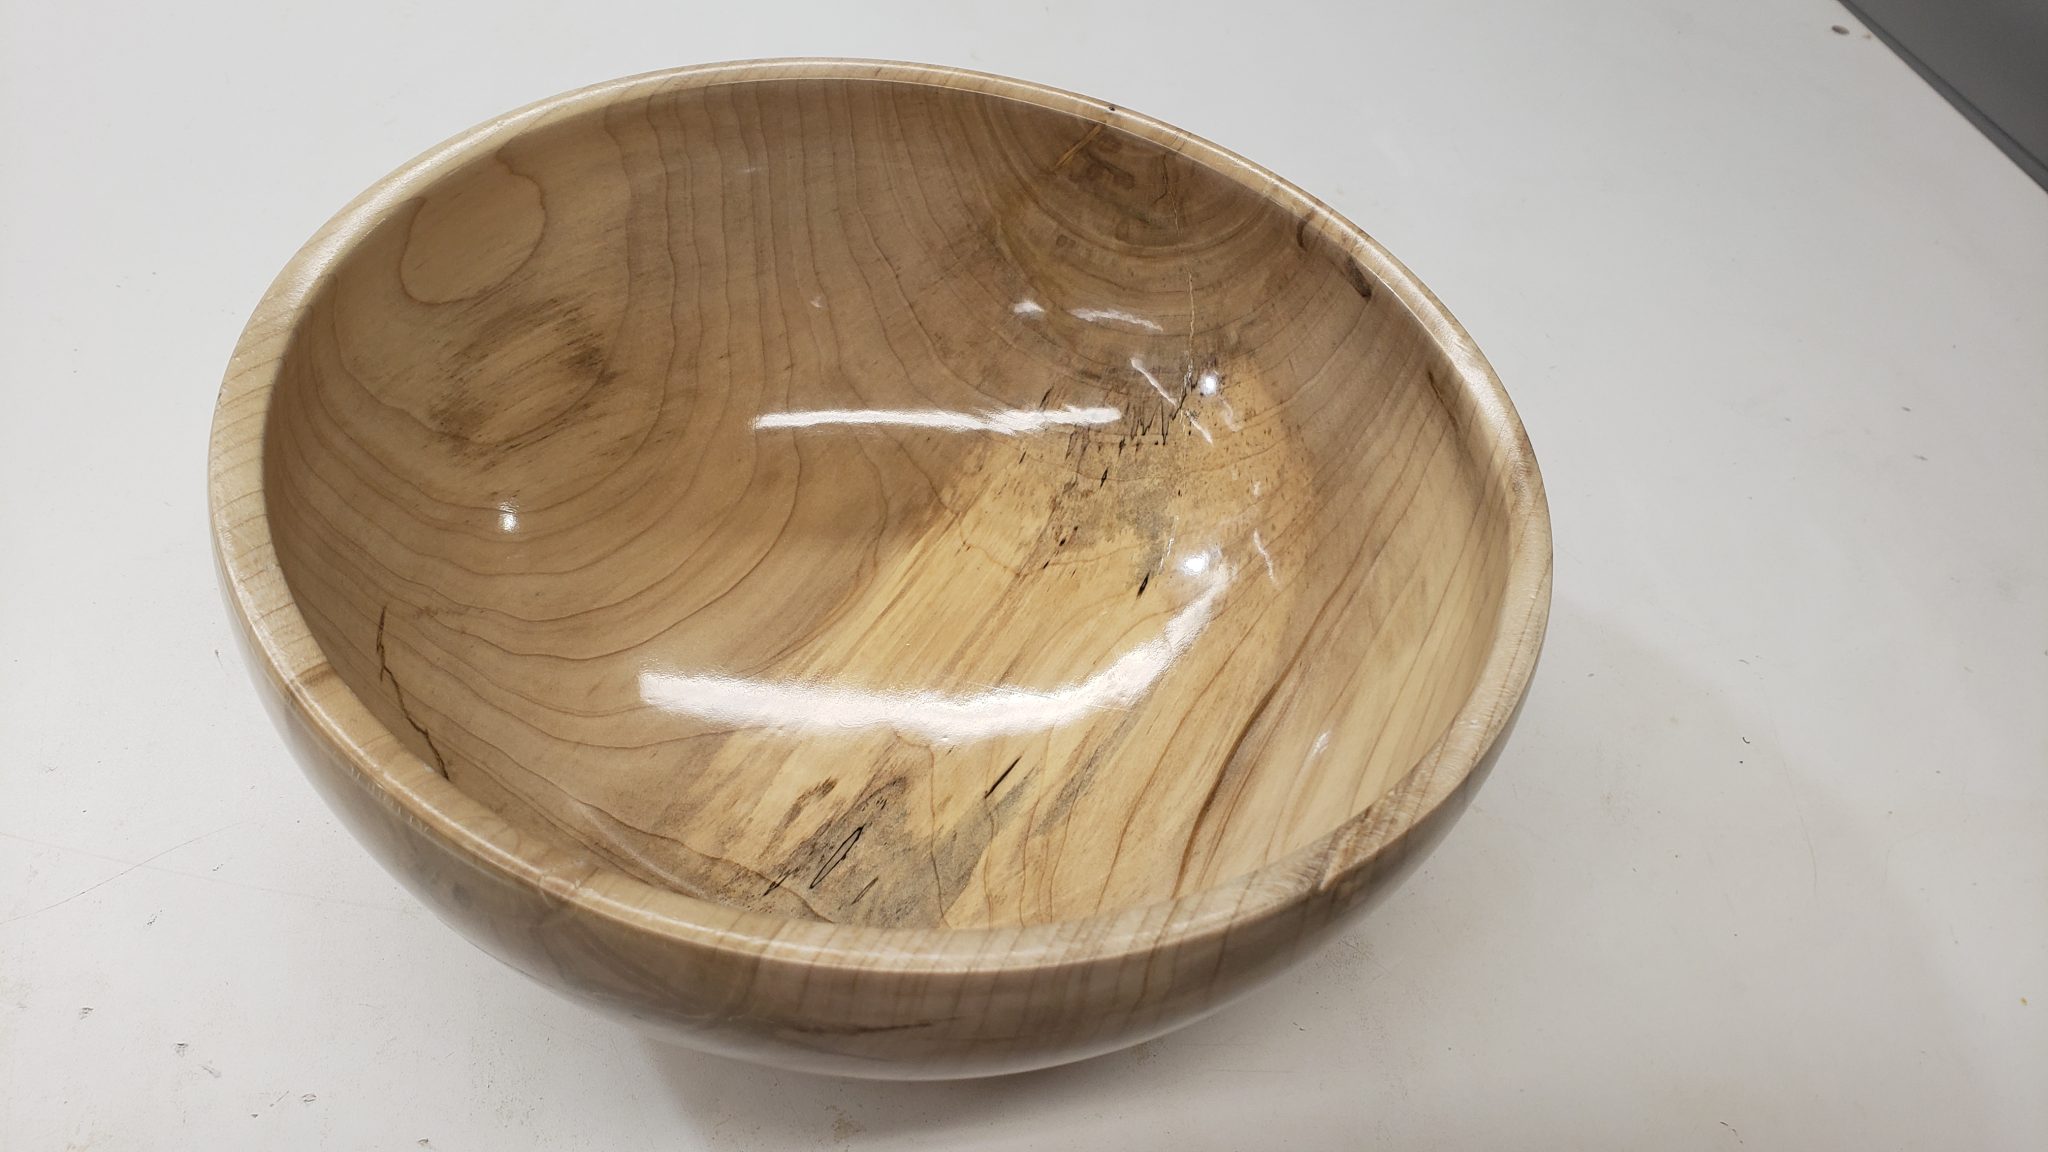 Spalted Poplar 11" bowl. Finished with water based conversion varnish.